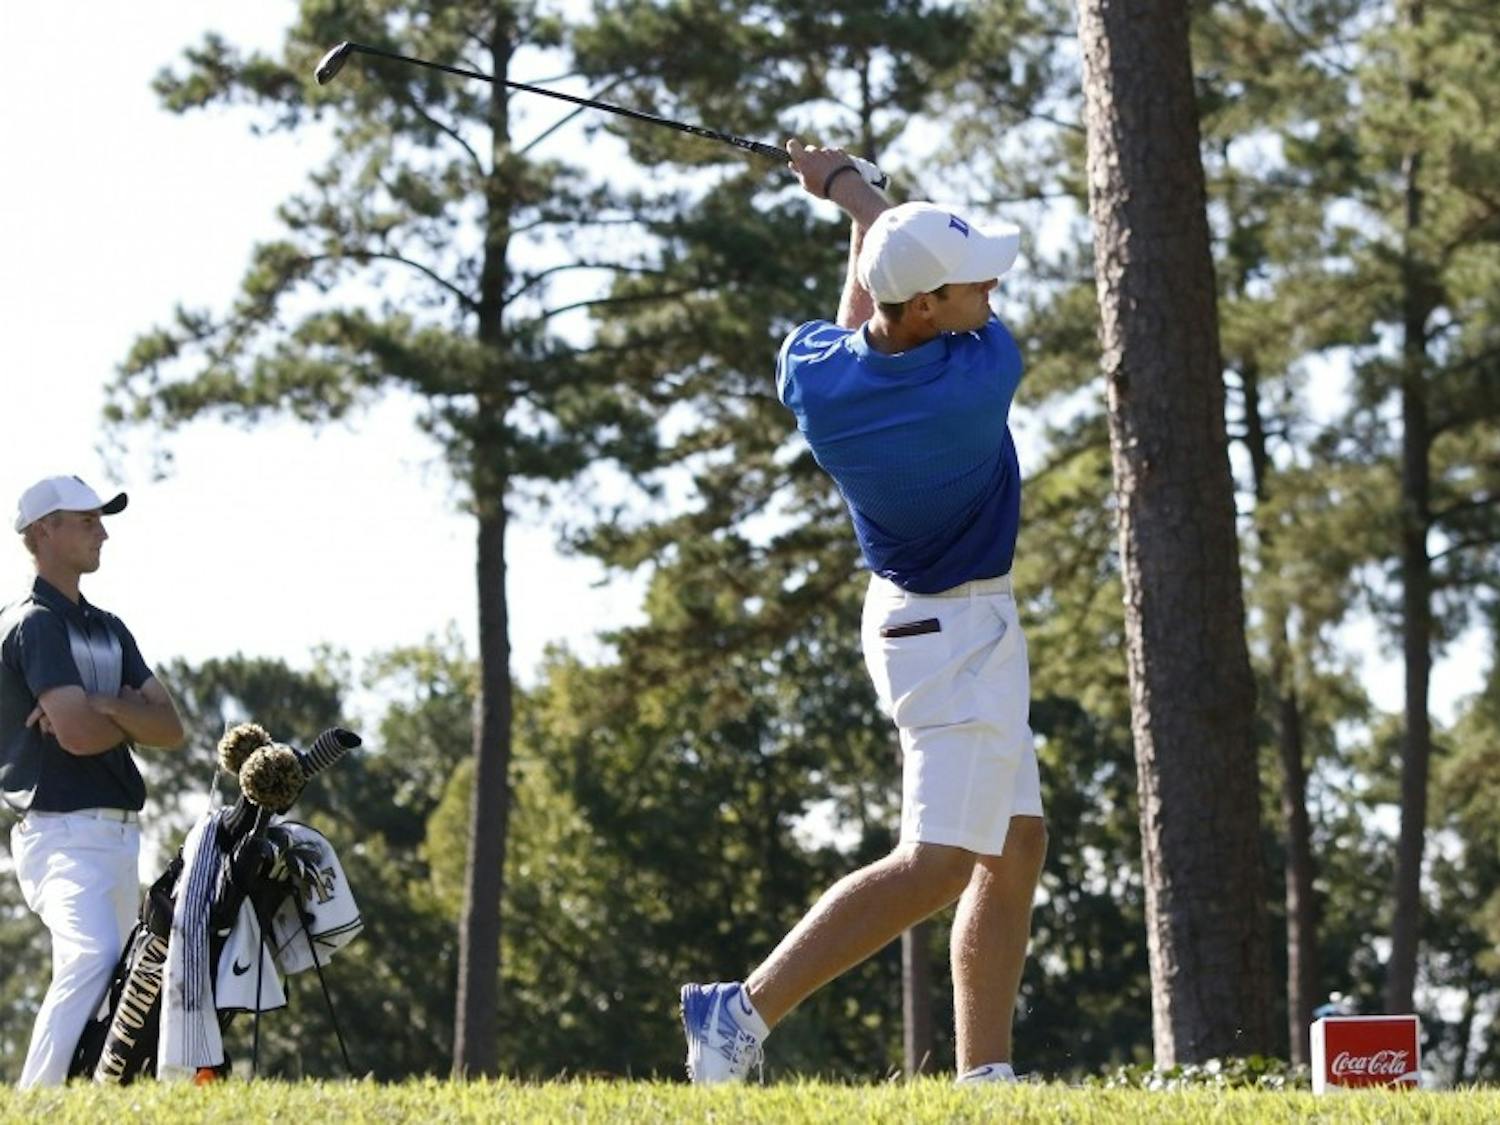 Adam Wood finished at even-par as the Blue Devils struggled at the Hootie at the Bull’s Bay Intercollegiate.